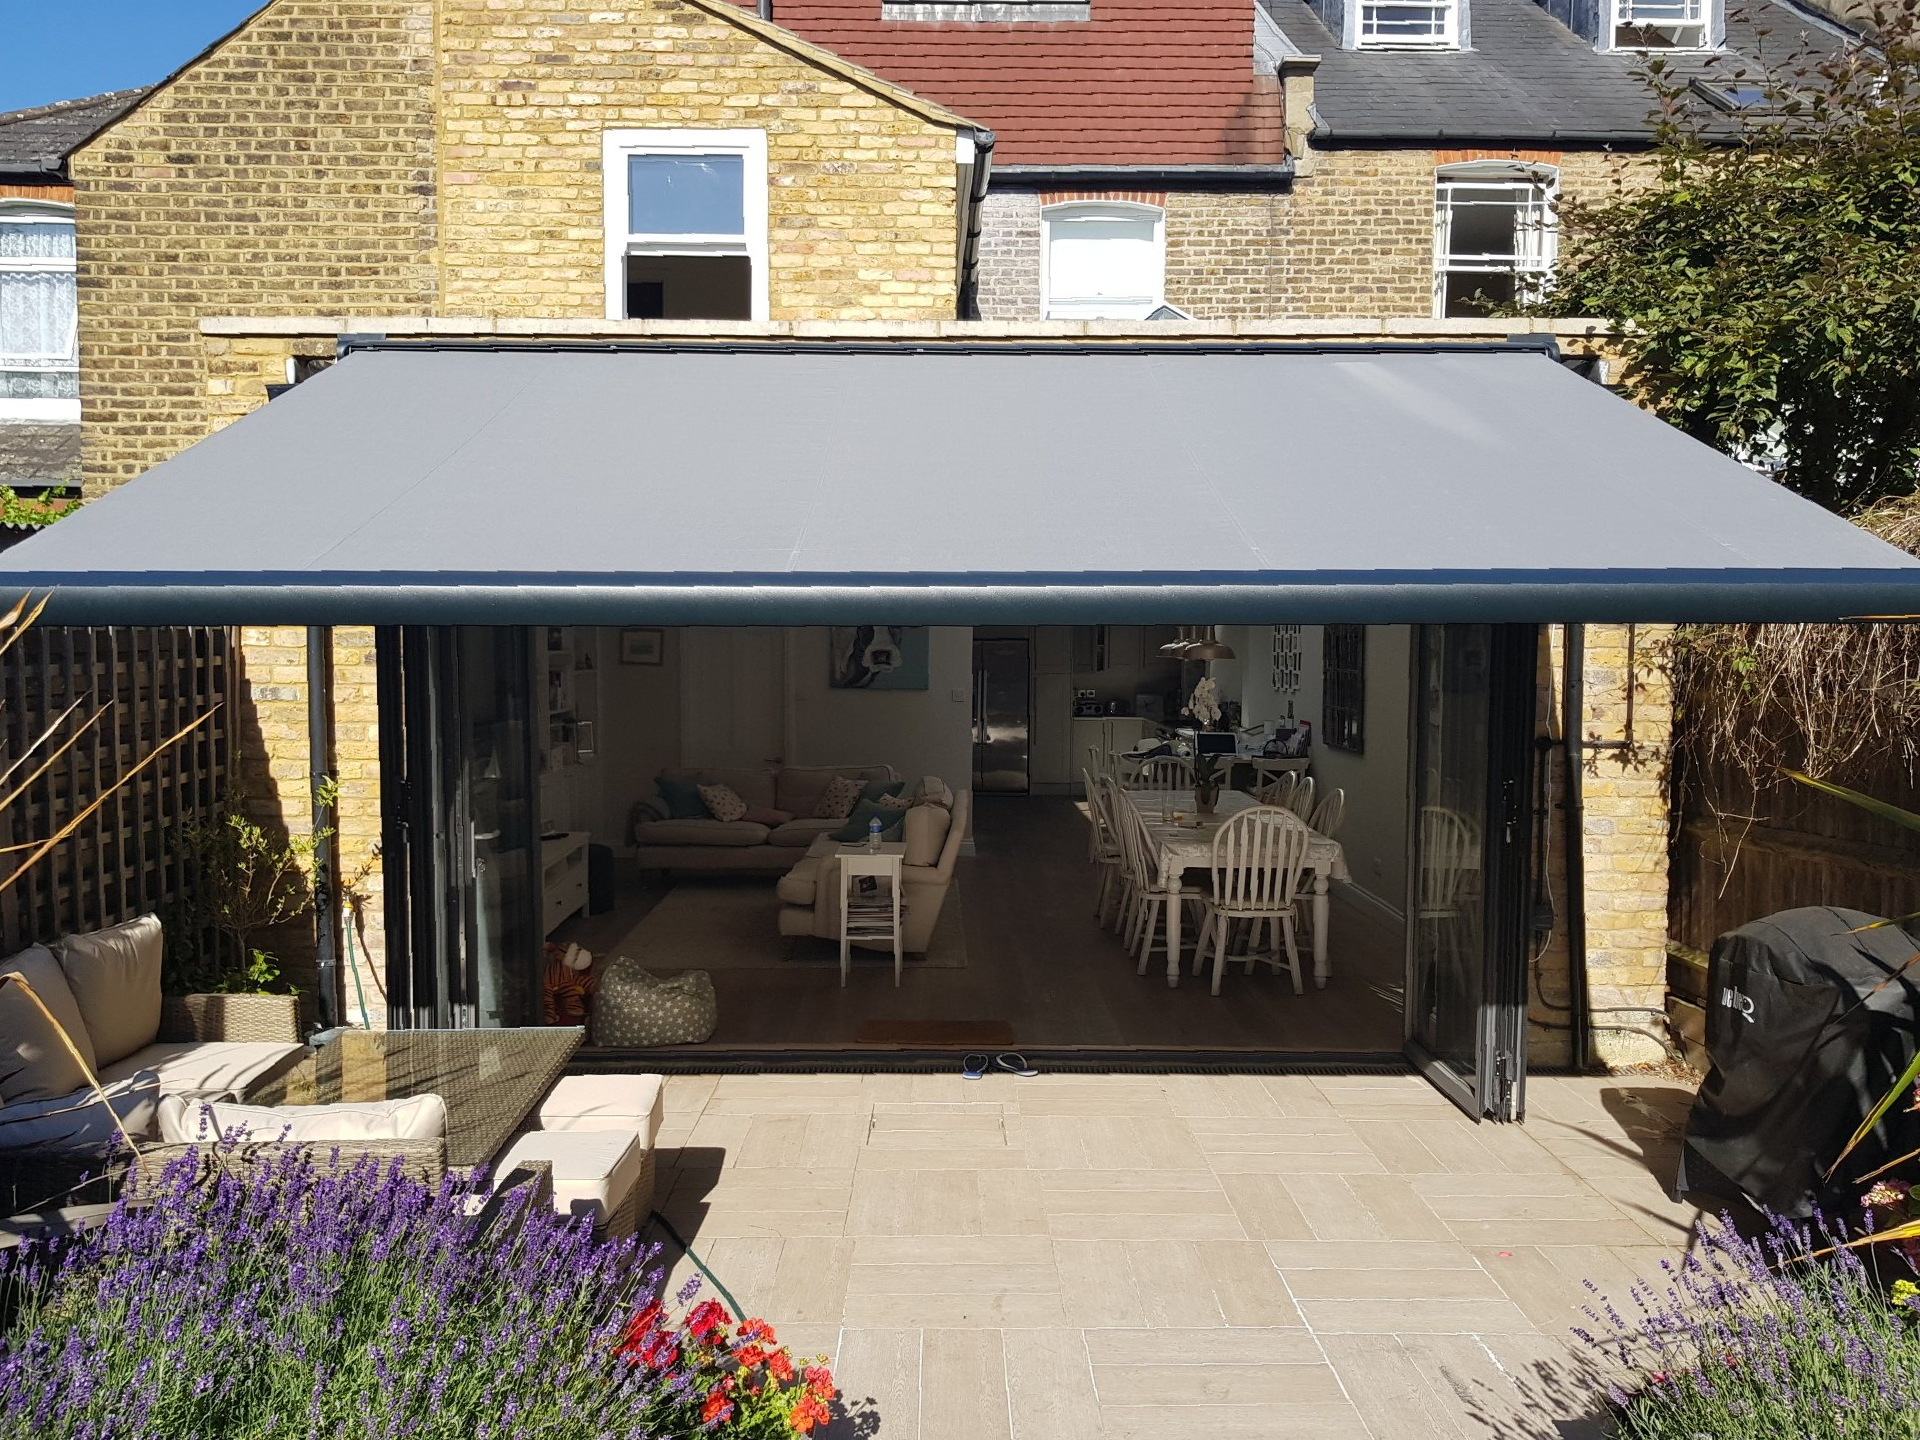 A close-up of a motorized retractable awning, showing the durable fabric and sleek design.